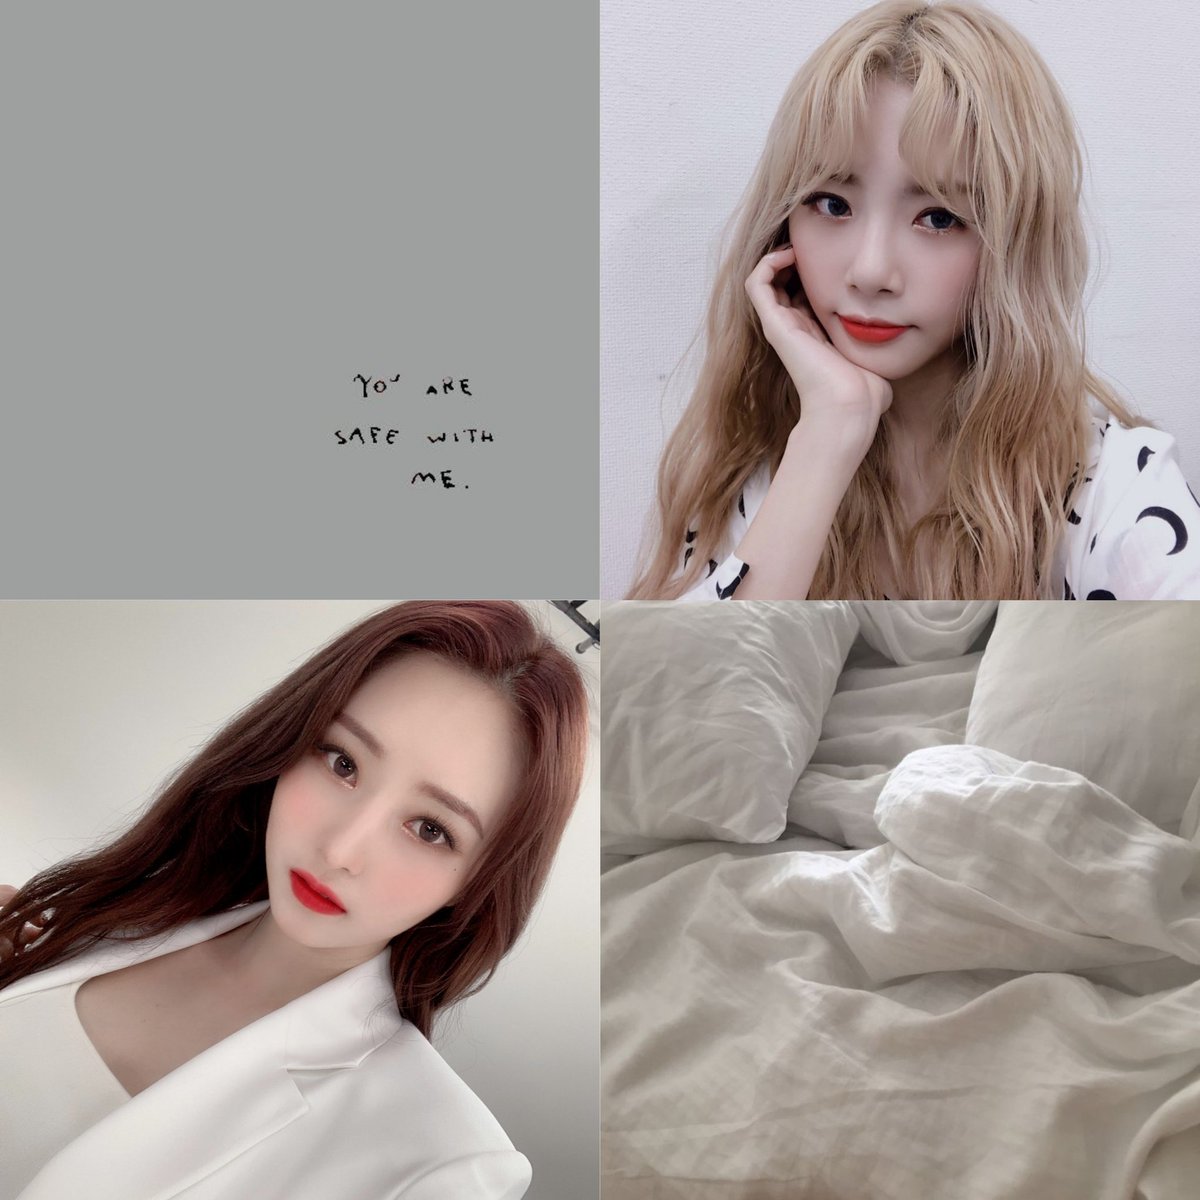 "even when morning comes, stay with me"ceo kim bora has troubles falling asleep, so she hires minji to help her. every morning when she wakes up, minji has already left. and with every passing day, bora wishes more and more that she would stay...